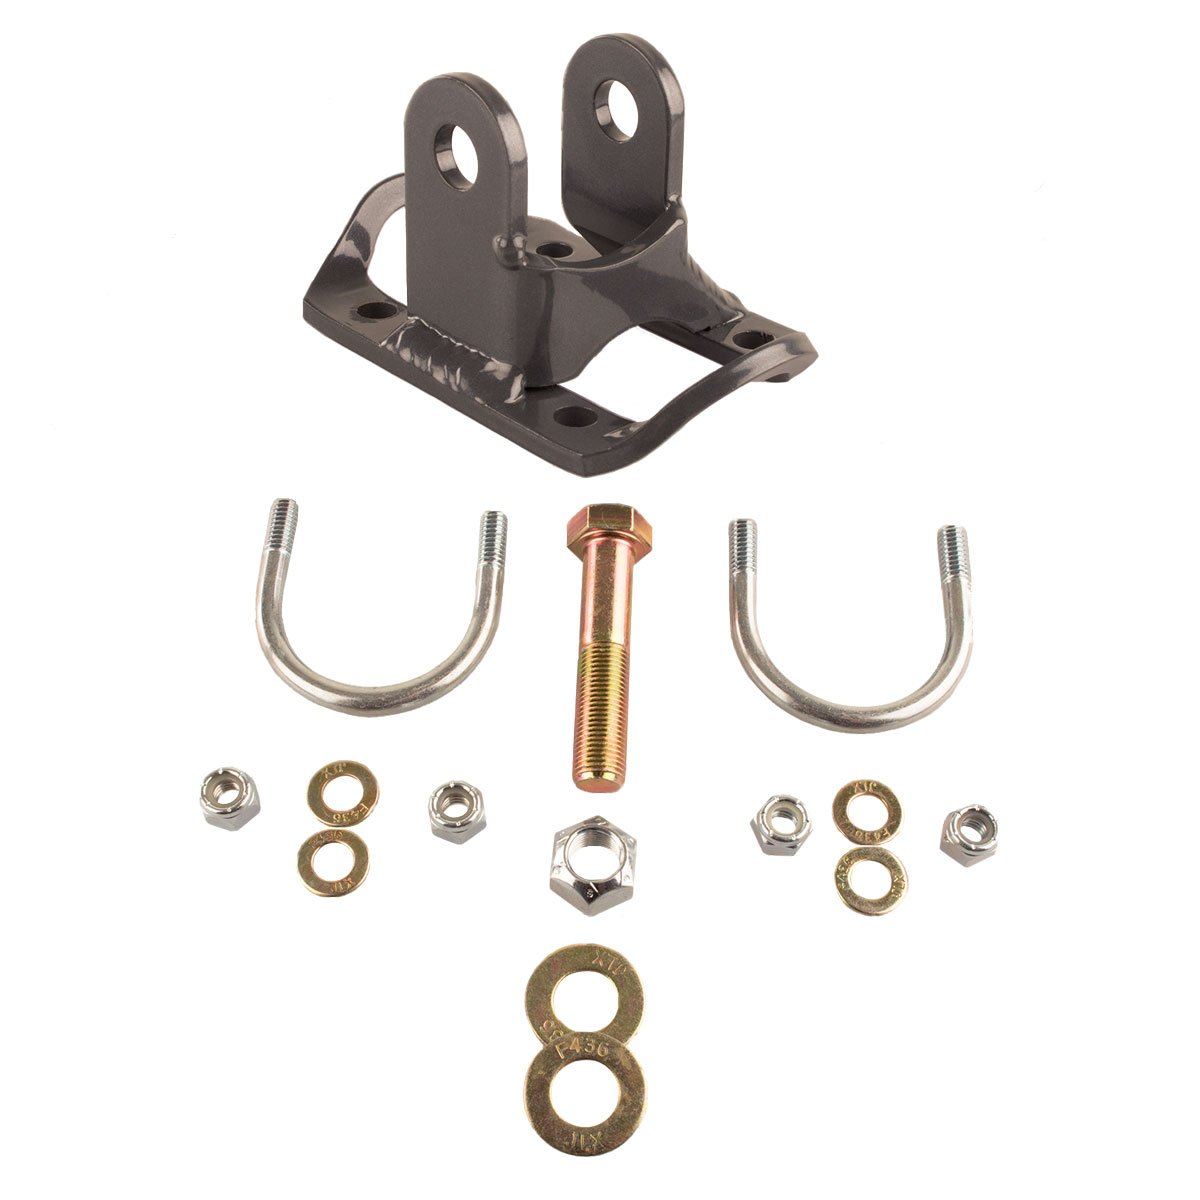 '13-23 Ram 3500 Steering Kit Suspension Synergy Manufacturing parts